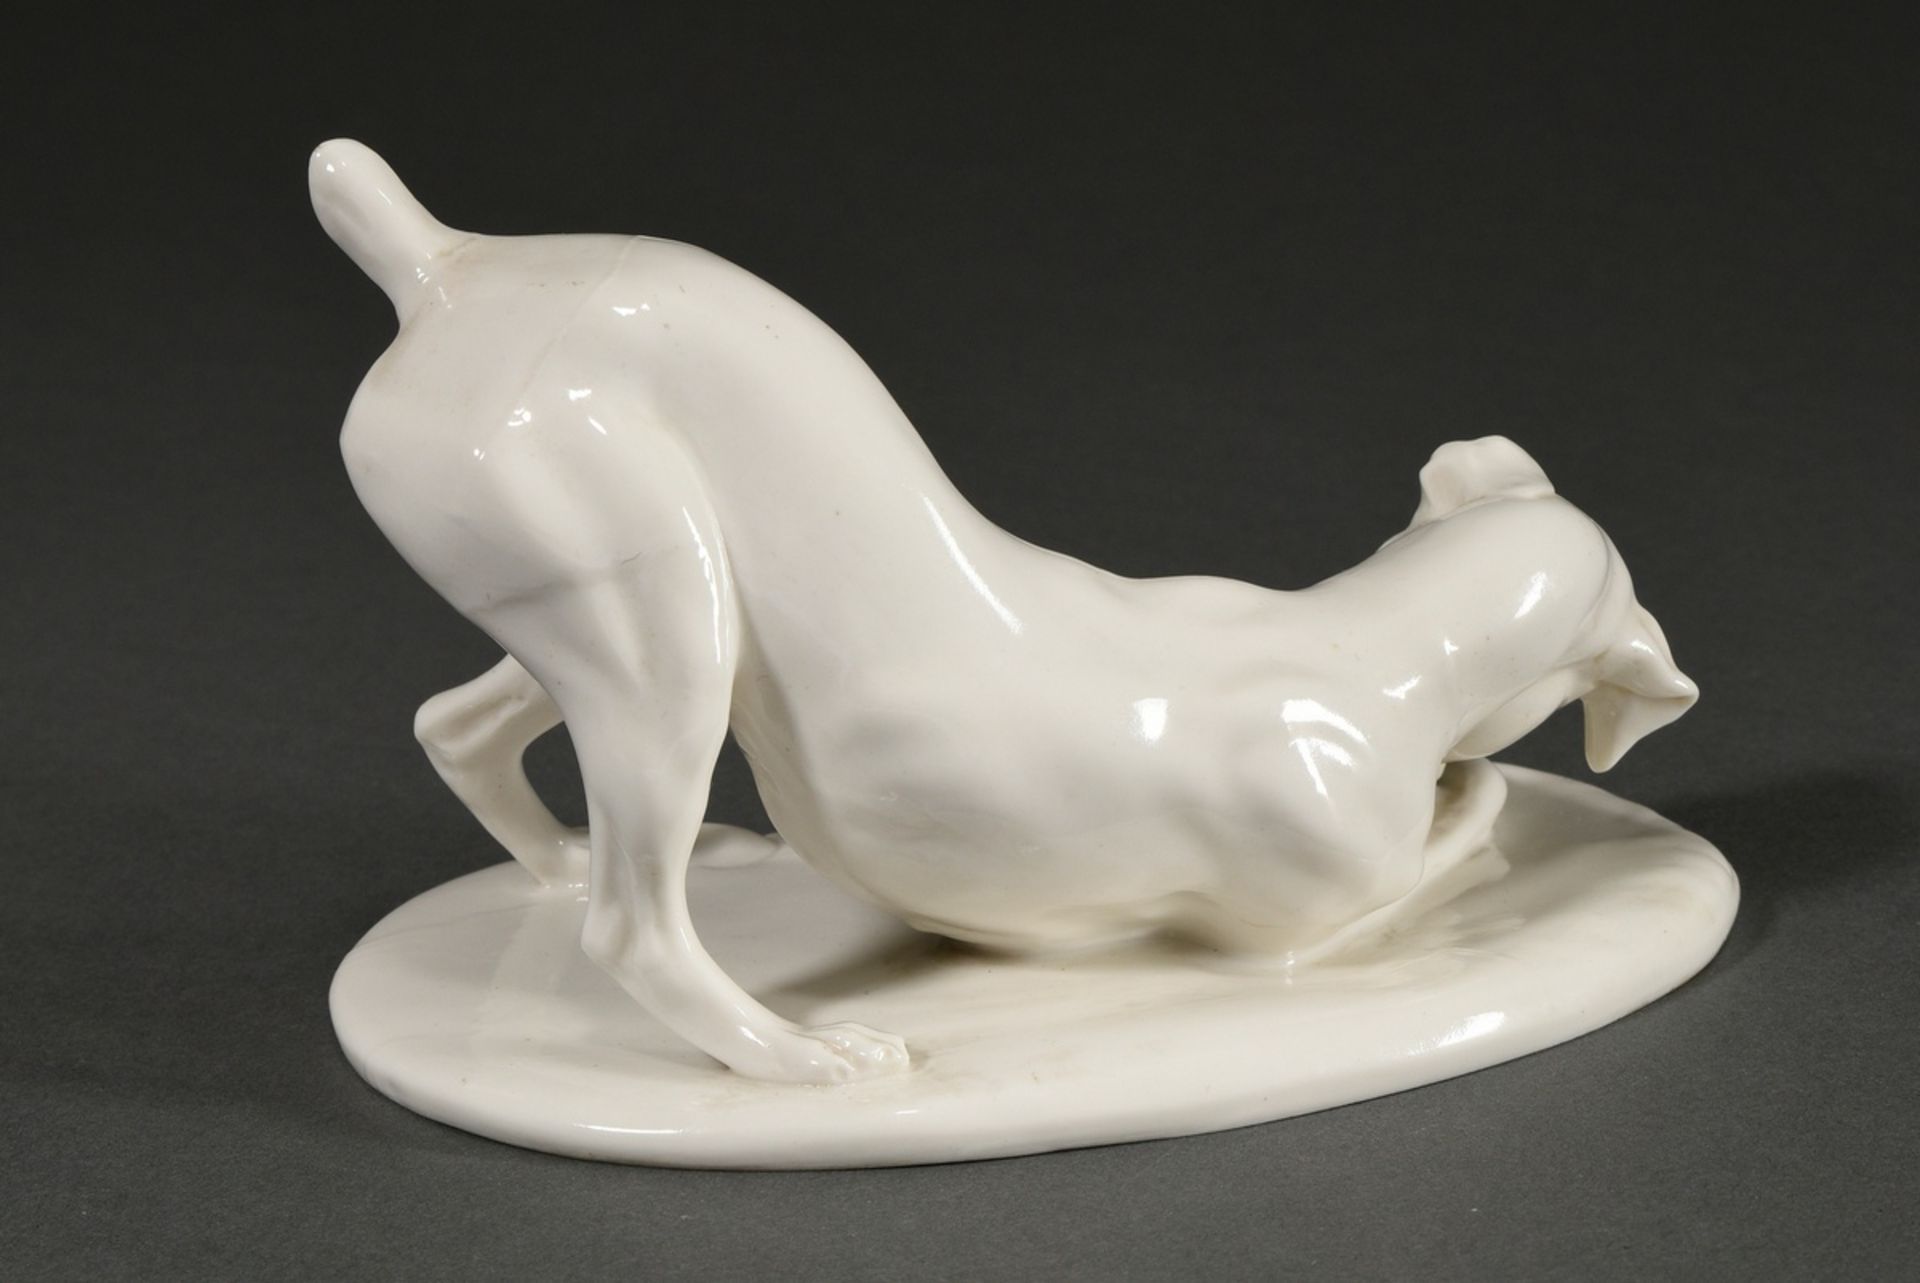 Nymphenburg figurine "Young Fox Terrier" 1913, designed by Theodor Kärner, 10x15.5x9.5cm - Image 2 of 4